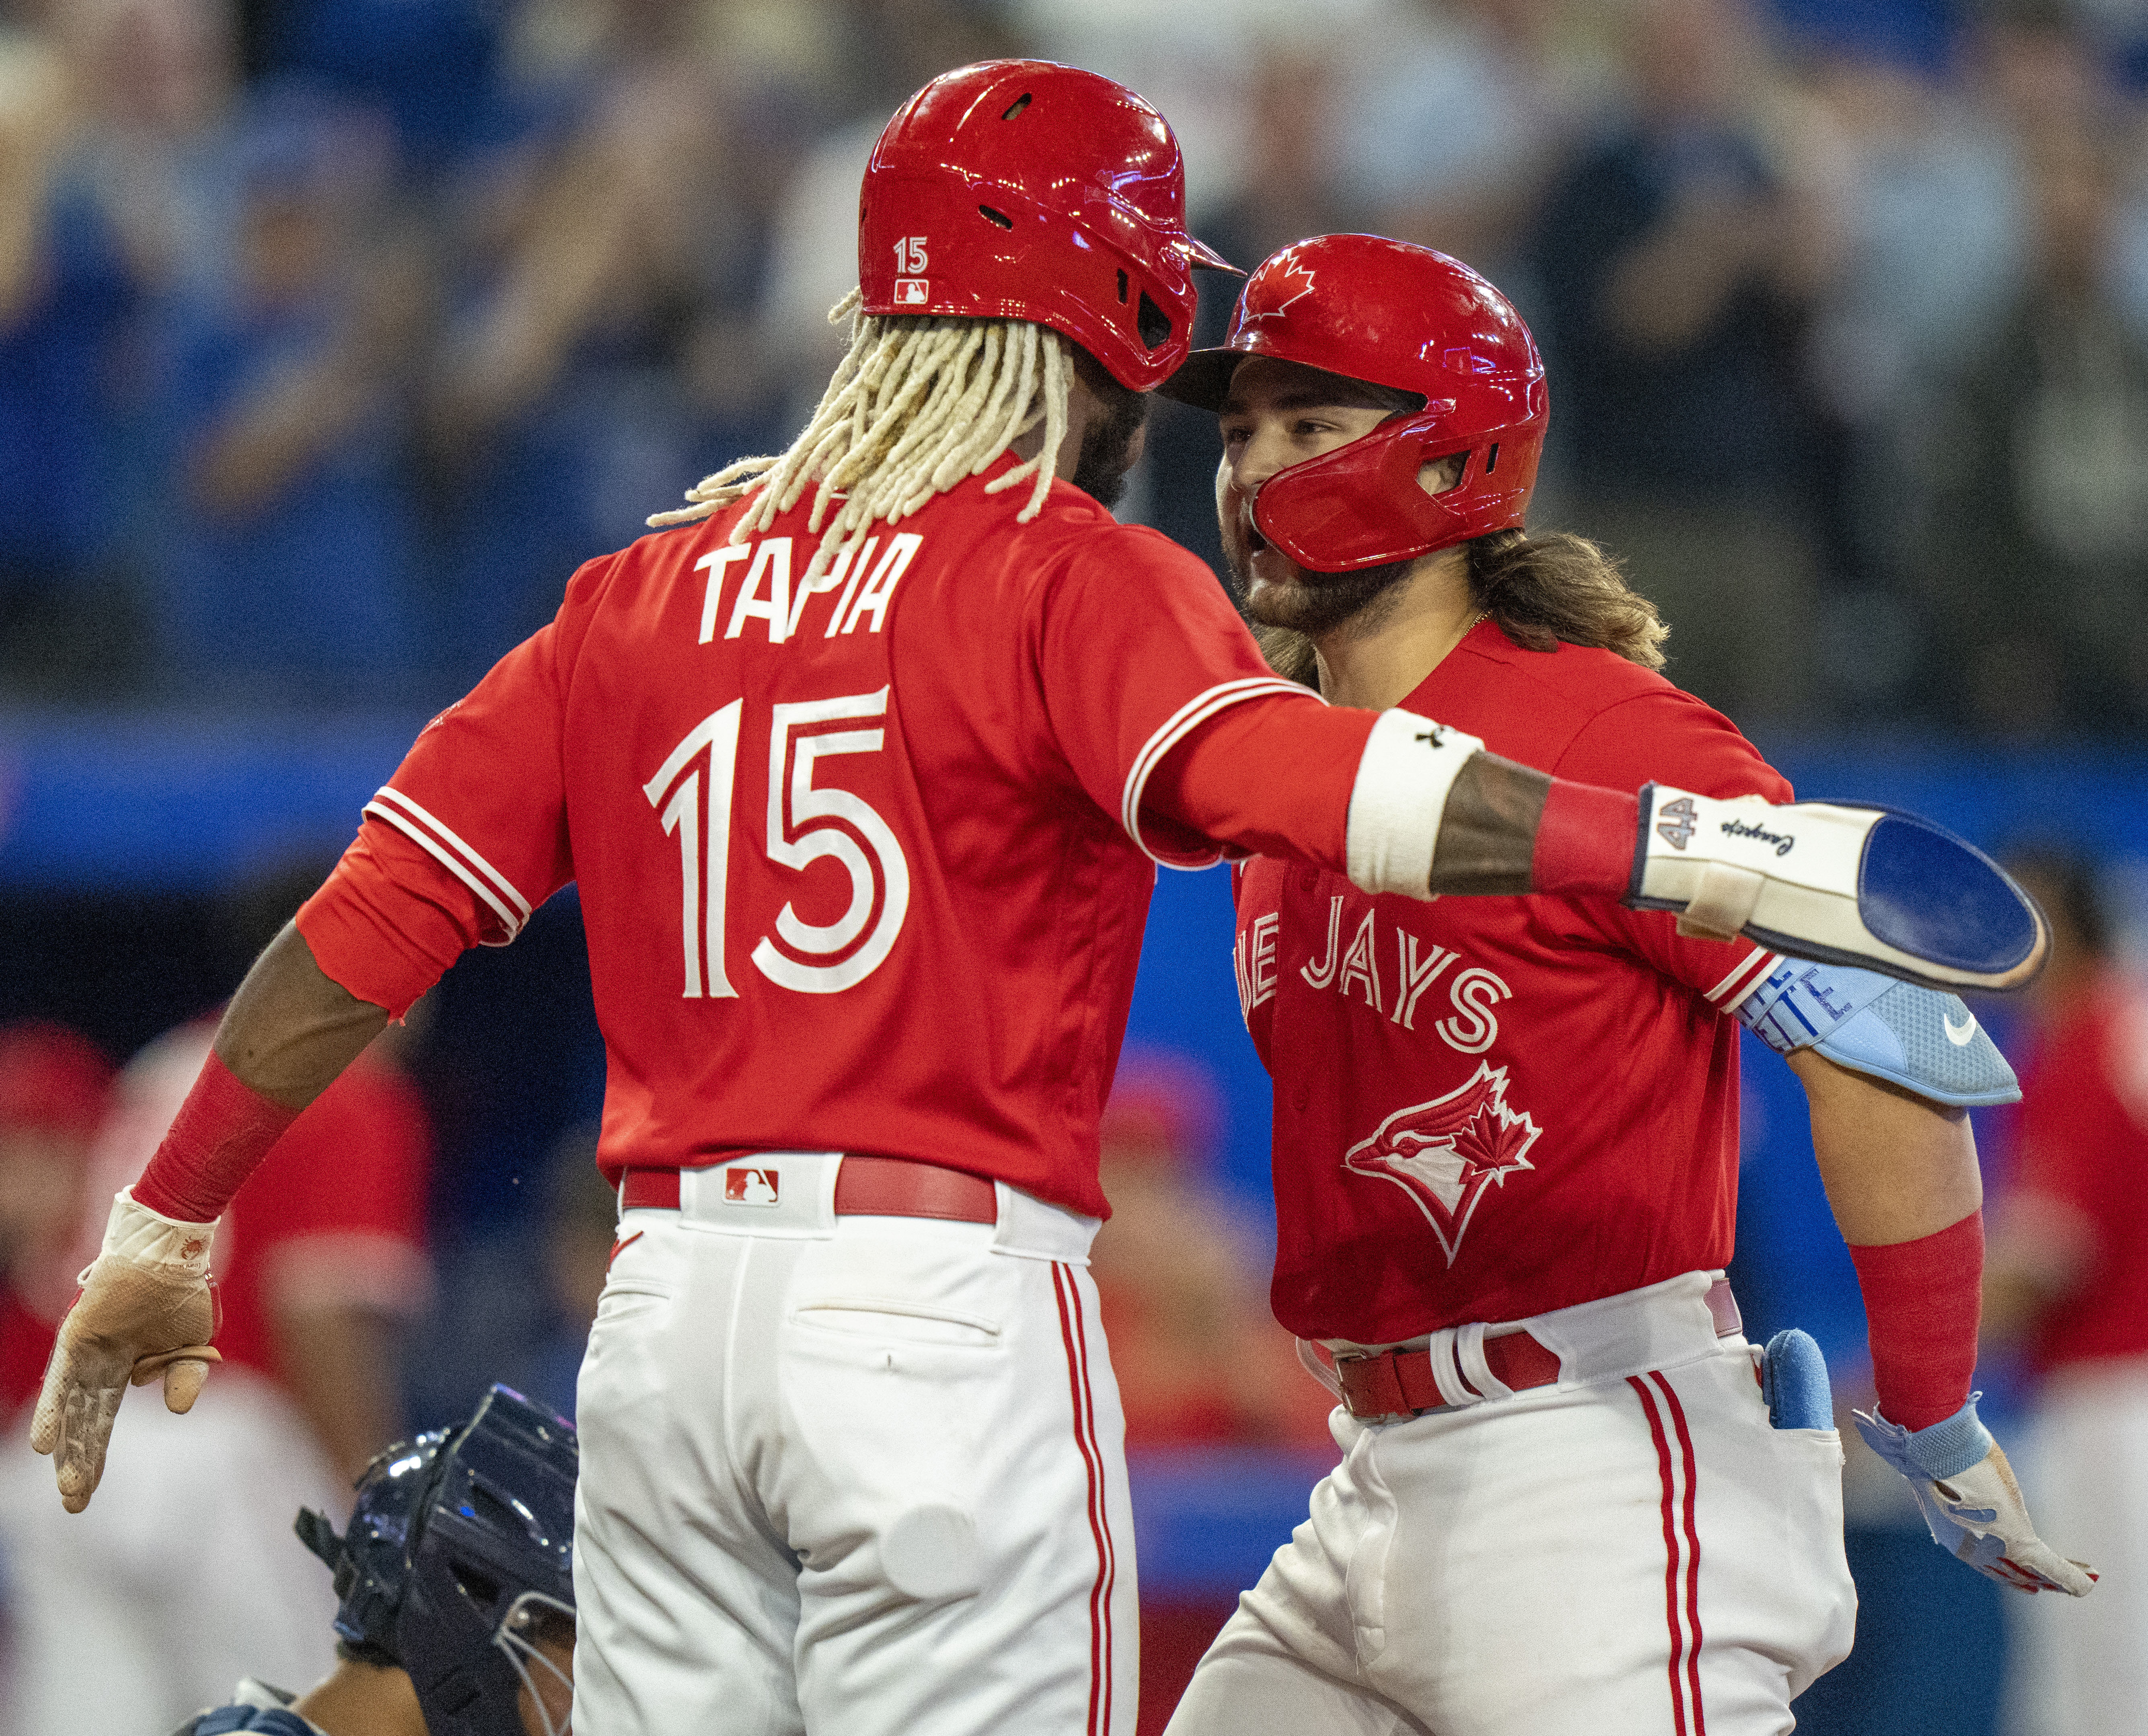 Bichette's second homer is go-ahead blast as Blue Jays earn critical win  over Yankees - Red Deer Advocate